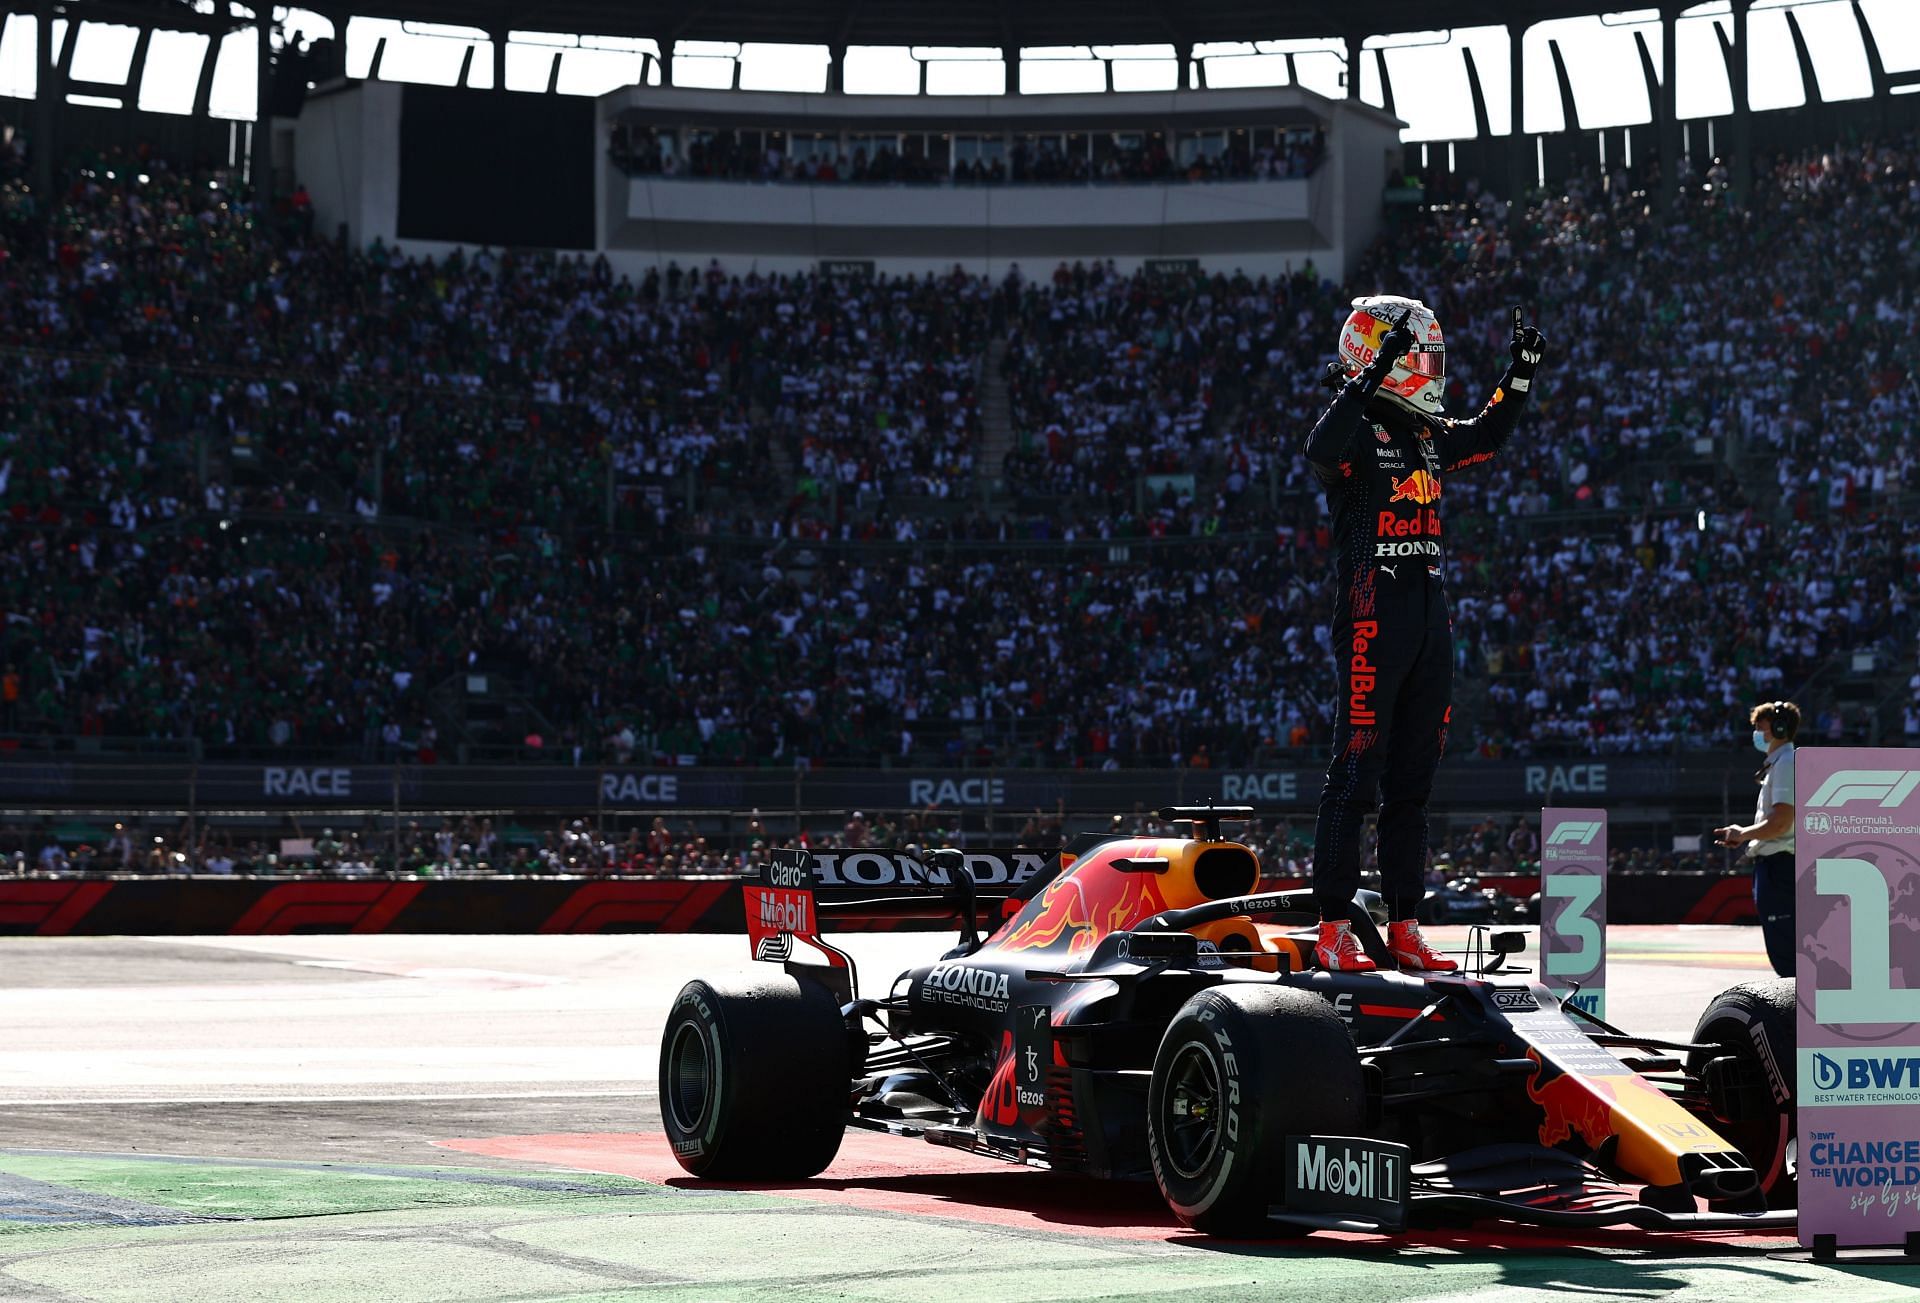 Race winner Max Verstappen of Red Bull Racing celebrates in parc ferme during the 2021 Mexican GP. (Photo by Mark Thompson/Getty Images)